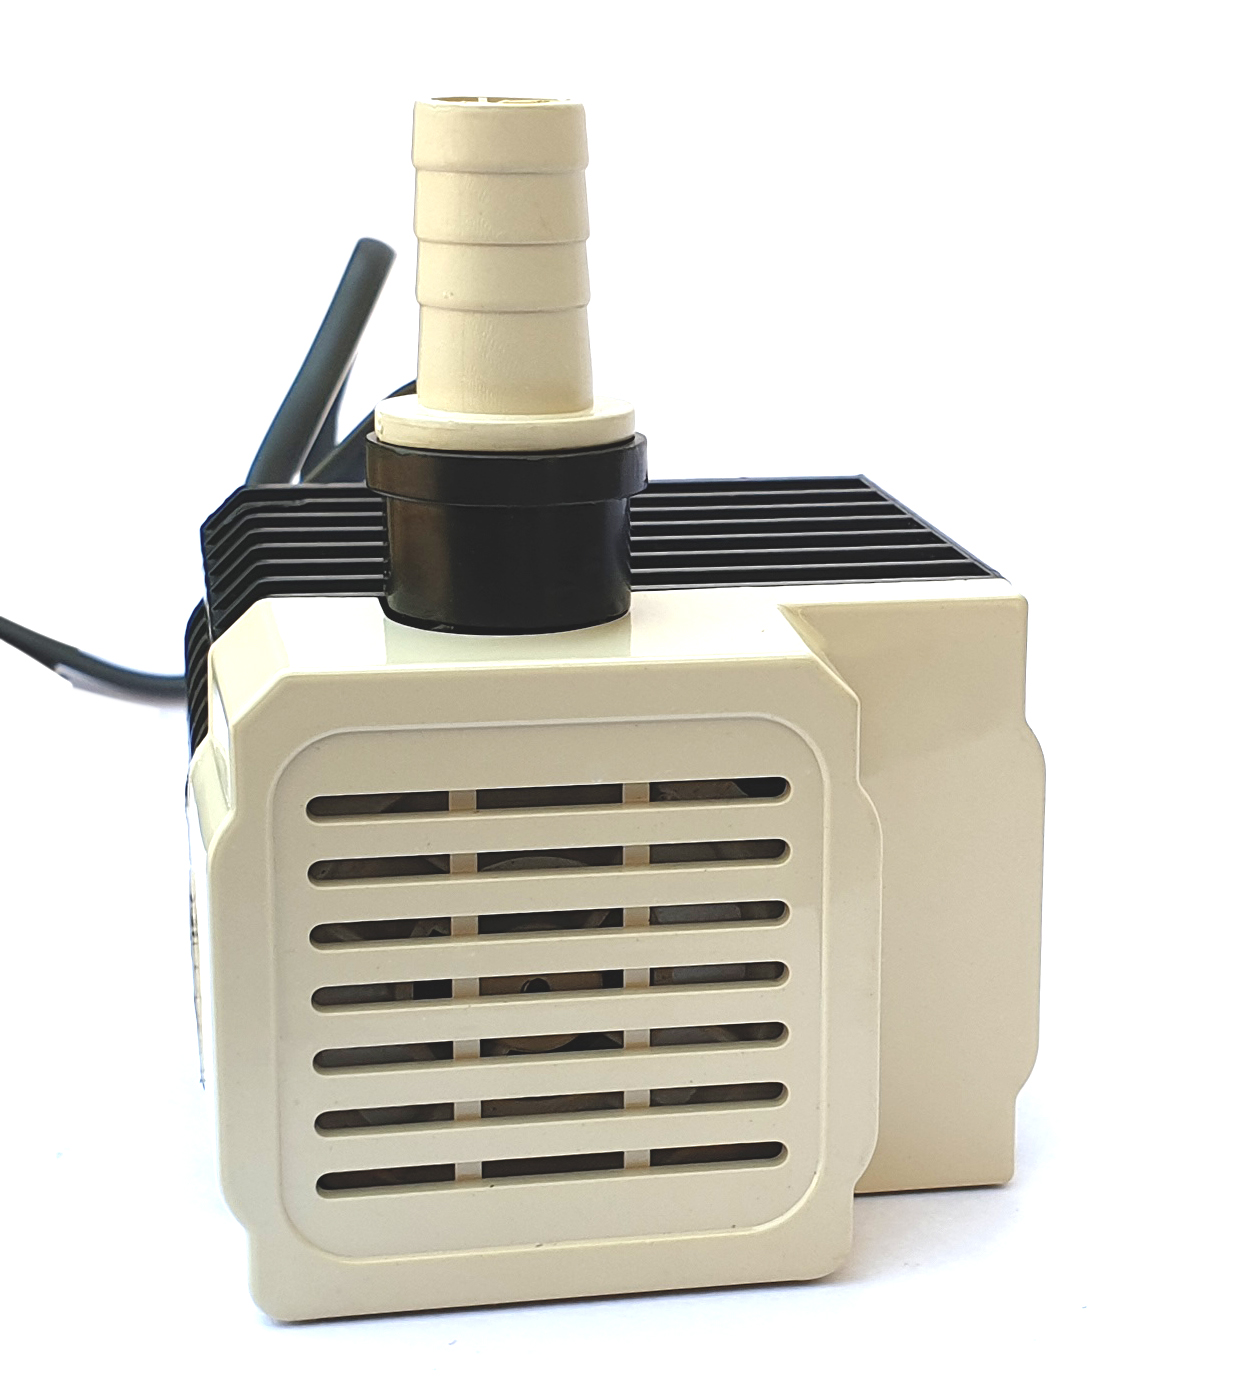 18W Submersible Pump for Desert Air Cooler, Aquarium, Fountains with 1.7m Lift and 600L/H Flow Rate